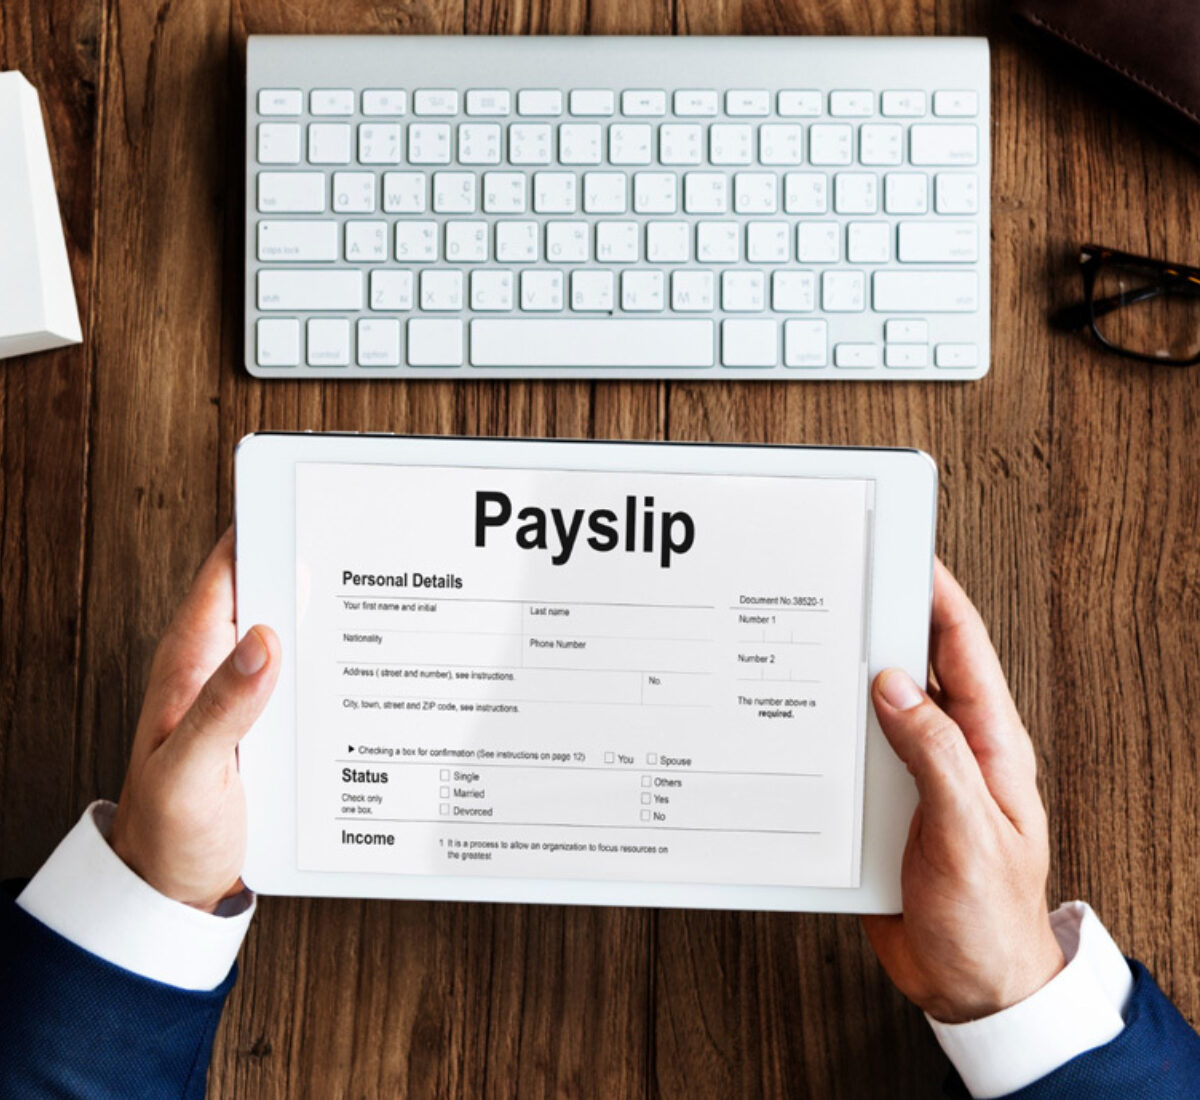 Can I switch to digital payslips?